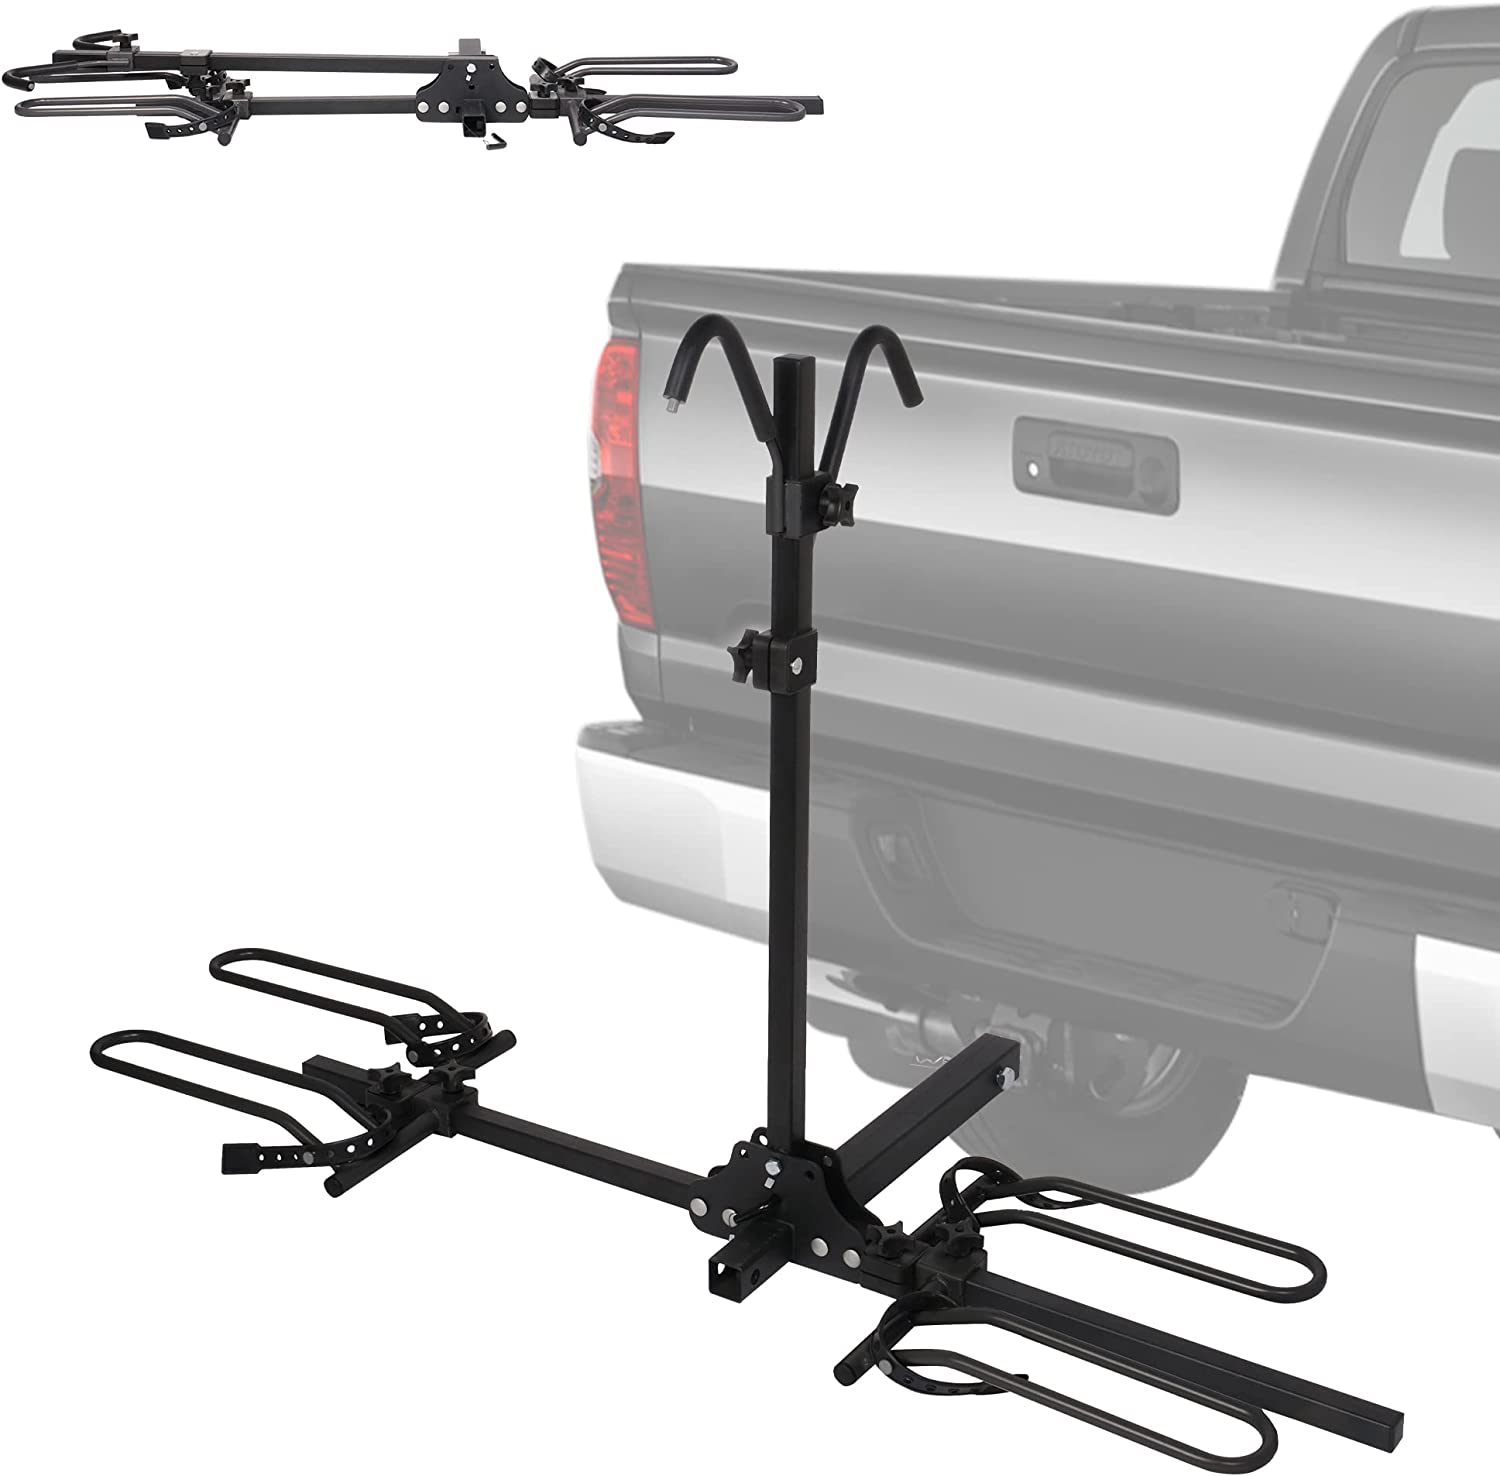 Hitch Mounted Bike Rack Bicycle Platform Style Carrier with 2" Hitch Receiver for Cars Trucks SUVs Minivans